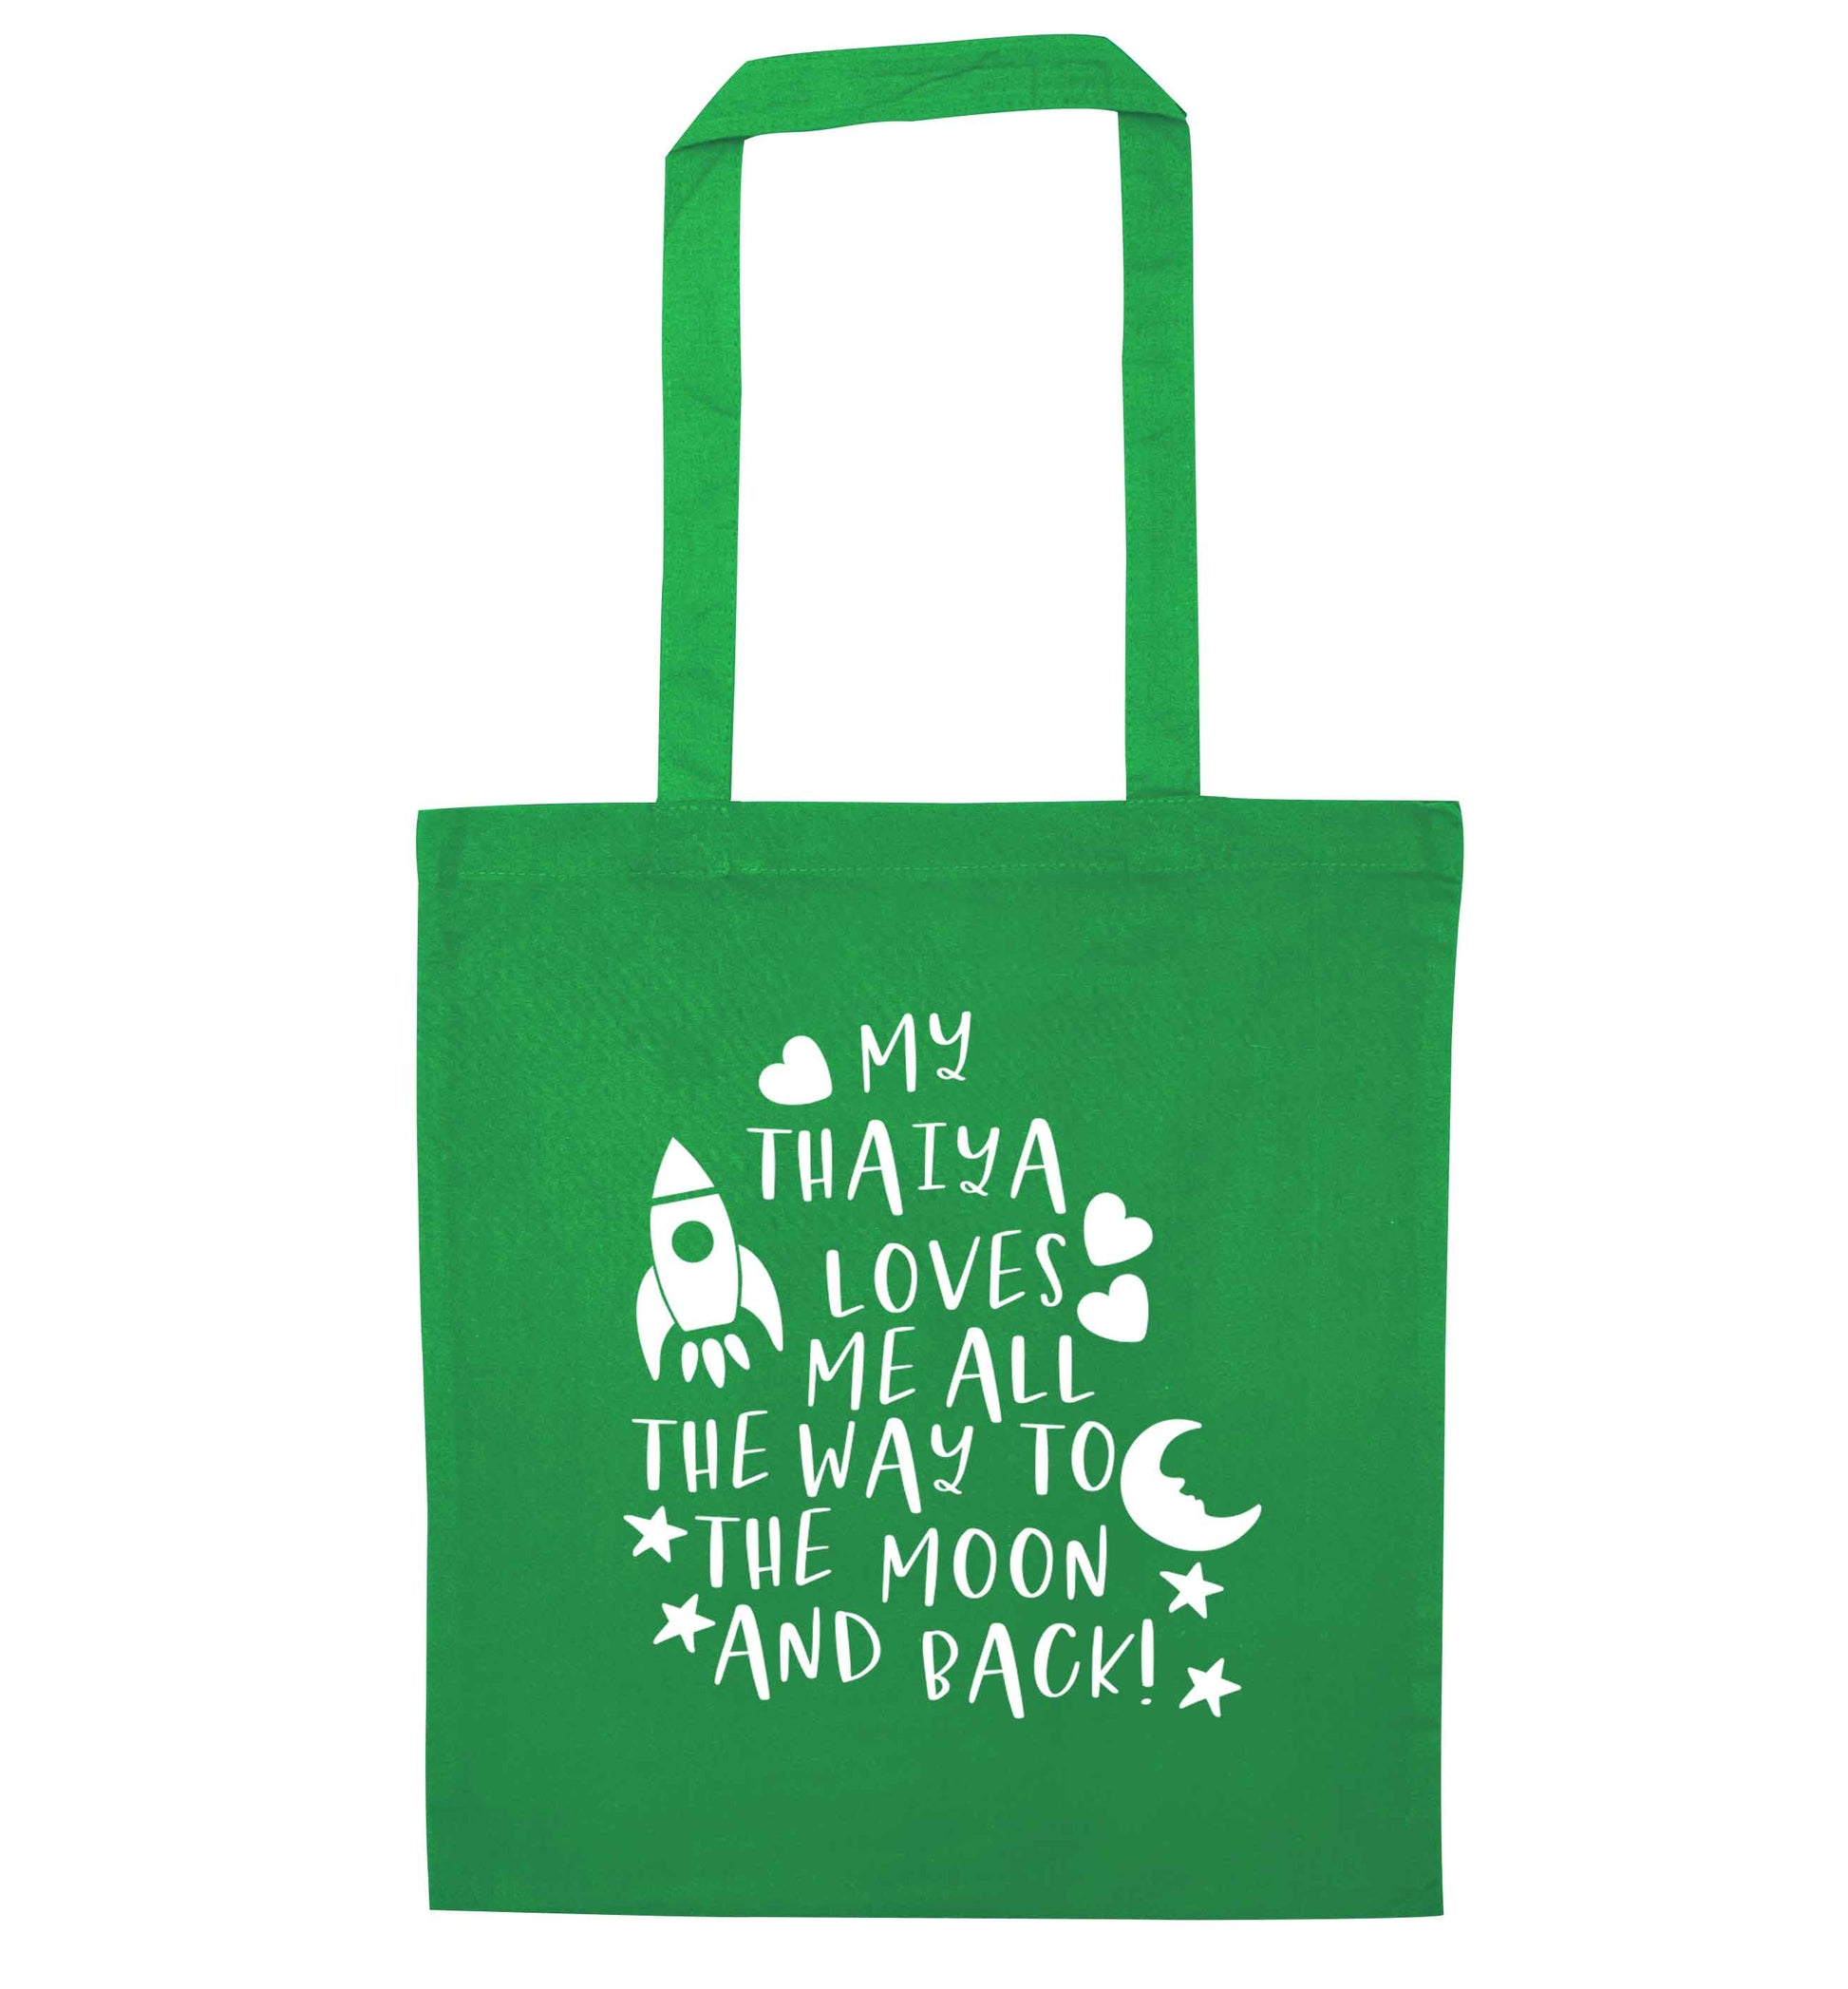 My thaiya loves me all the way to the moon and back green tote bag